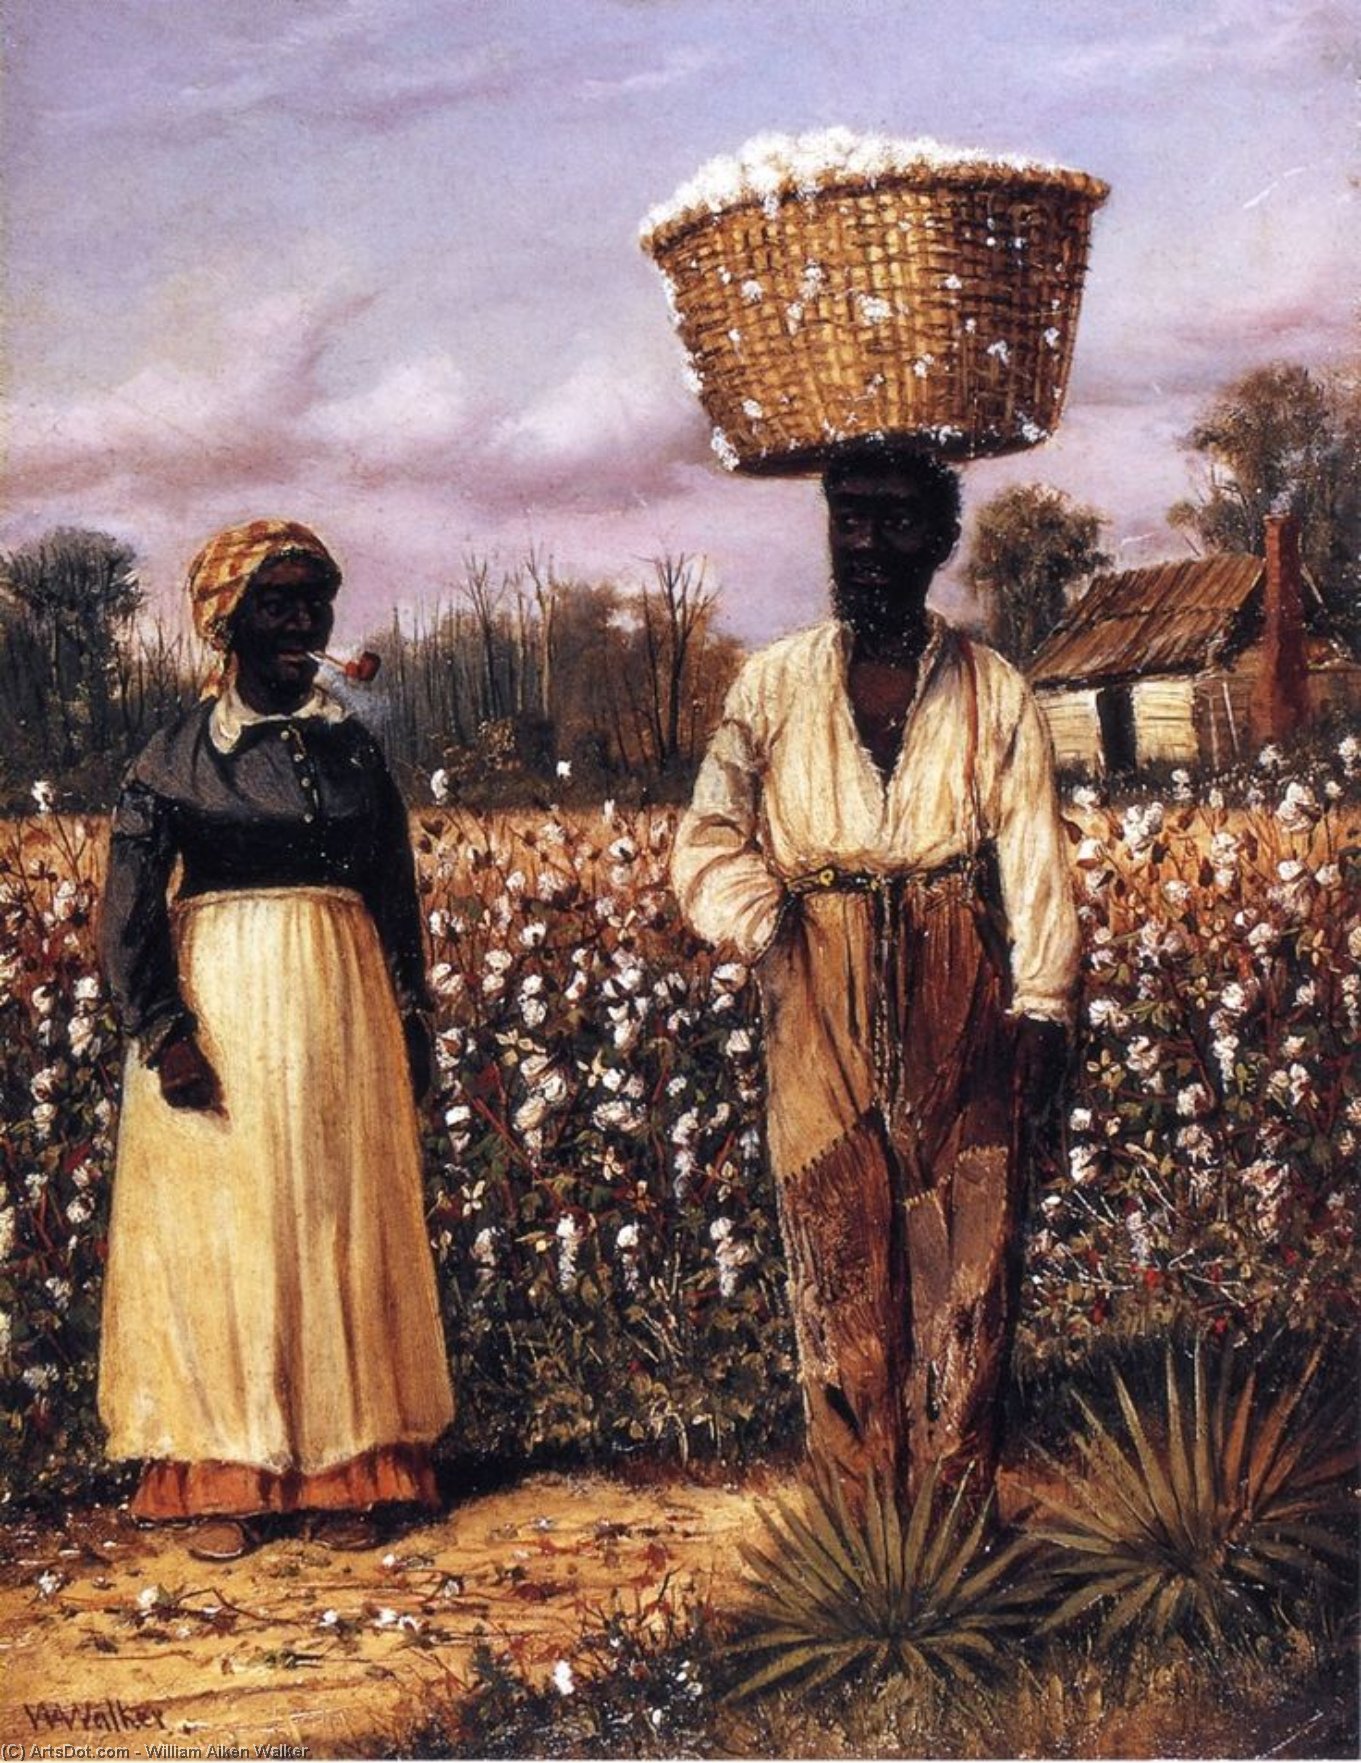 Buy Museum Art Reproductions Negro Man And Woman In Cotton Field With Cotton Baskets 1 by William Aiken Walker (1839-1921, United States) | ArtsDot.com